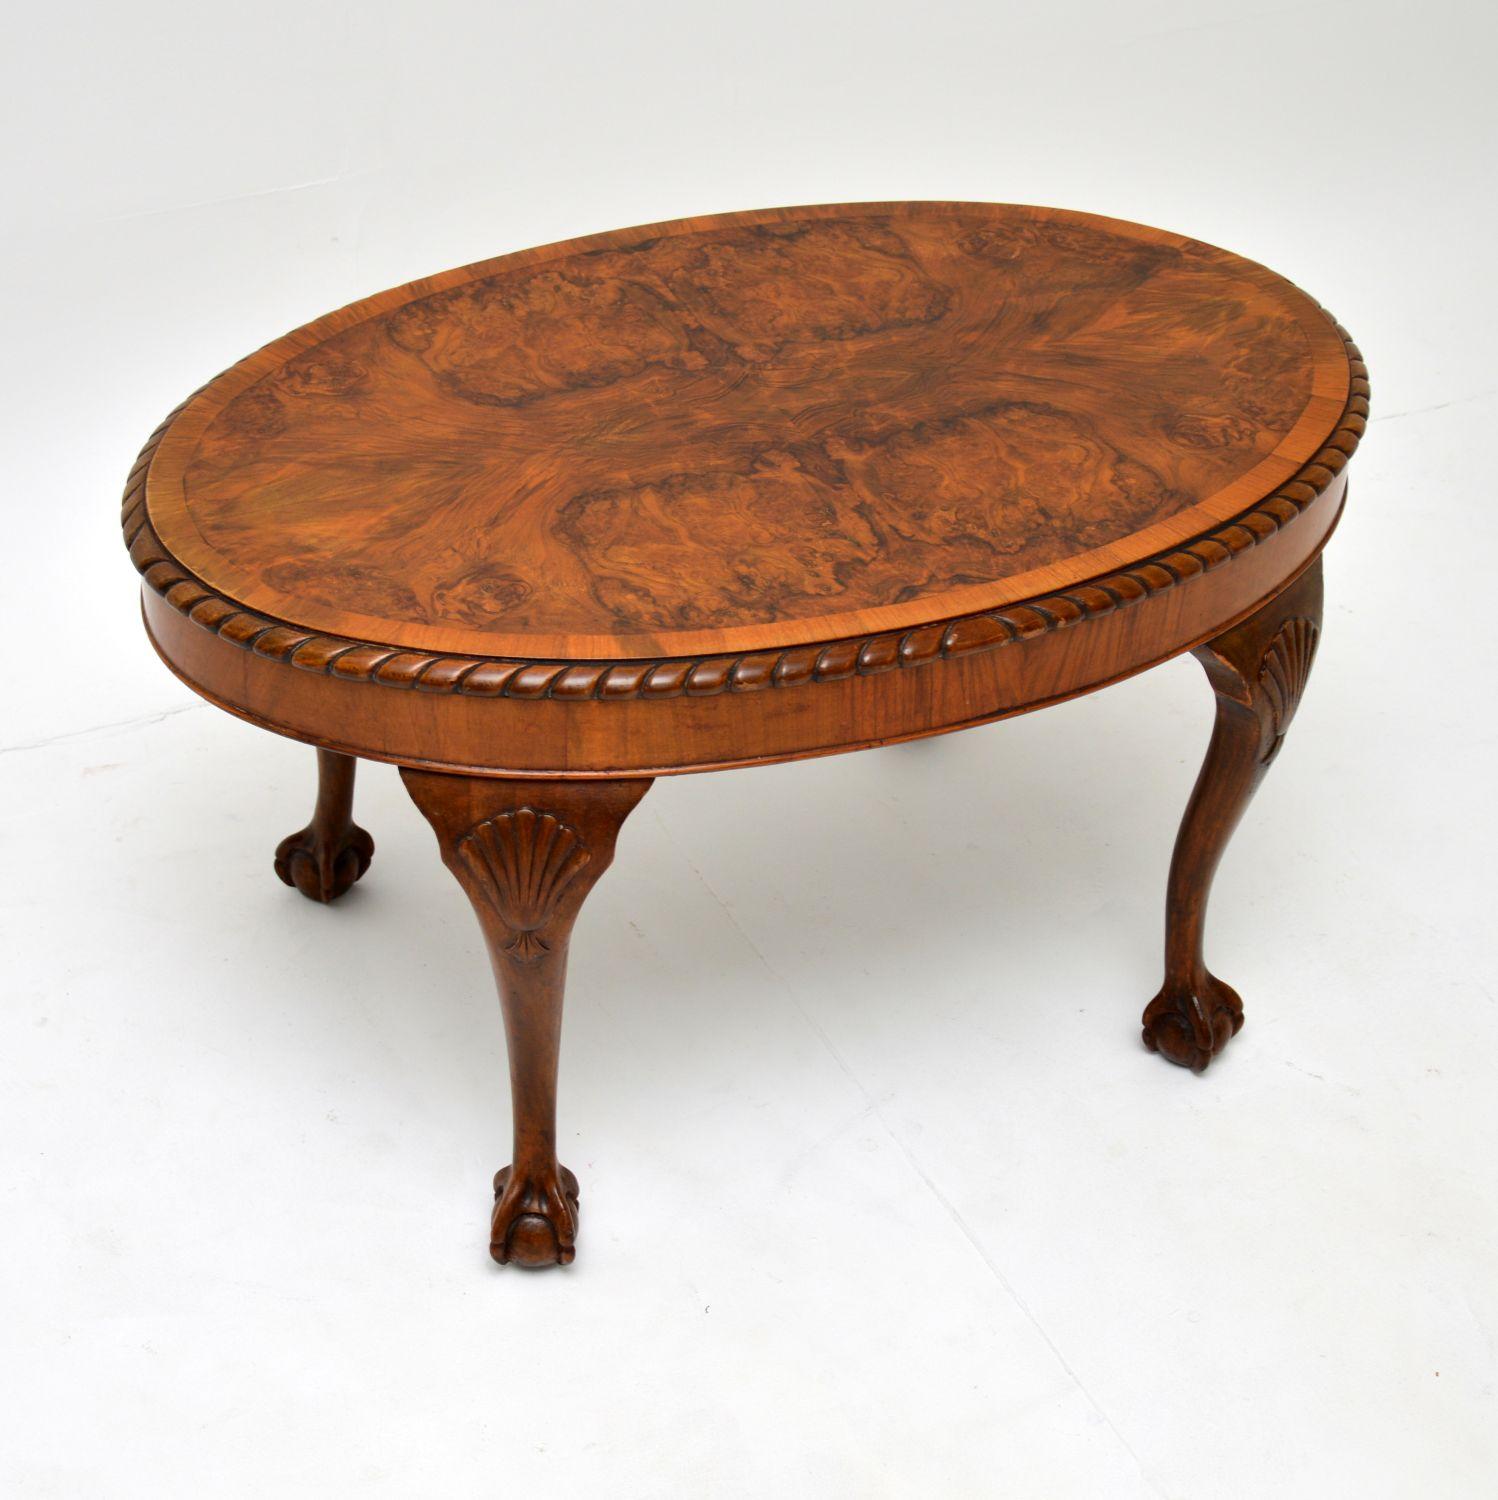 This gorgeous antique Queen Anne style coffee table is beautifully made from walnut and dates from around the 1900-1920 period.

It is of excellent quality and is a useful size. The top has spectacular burr walnut grain patterns, with a cross